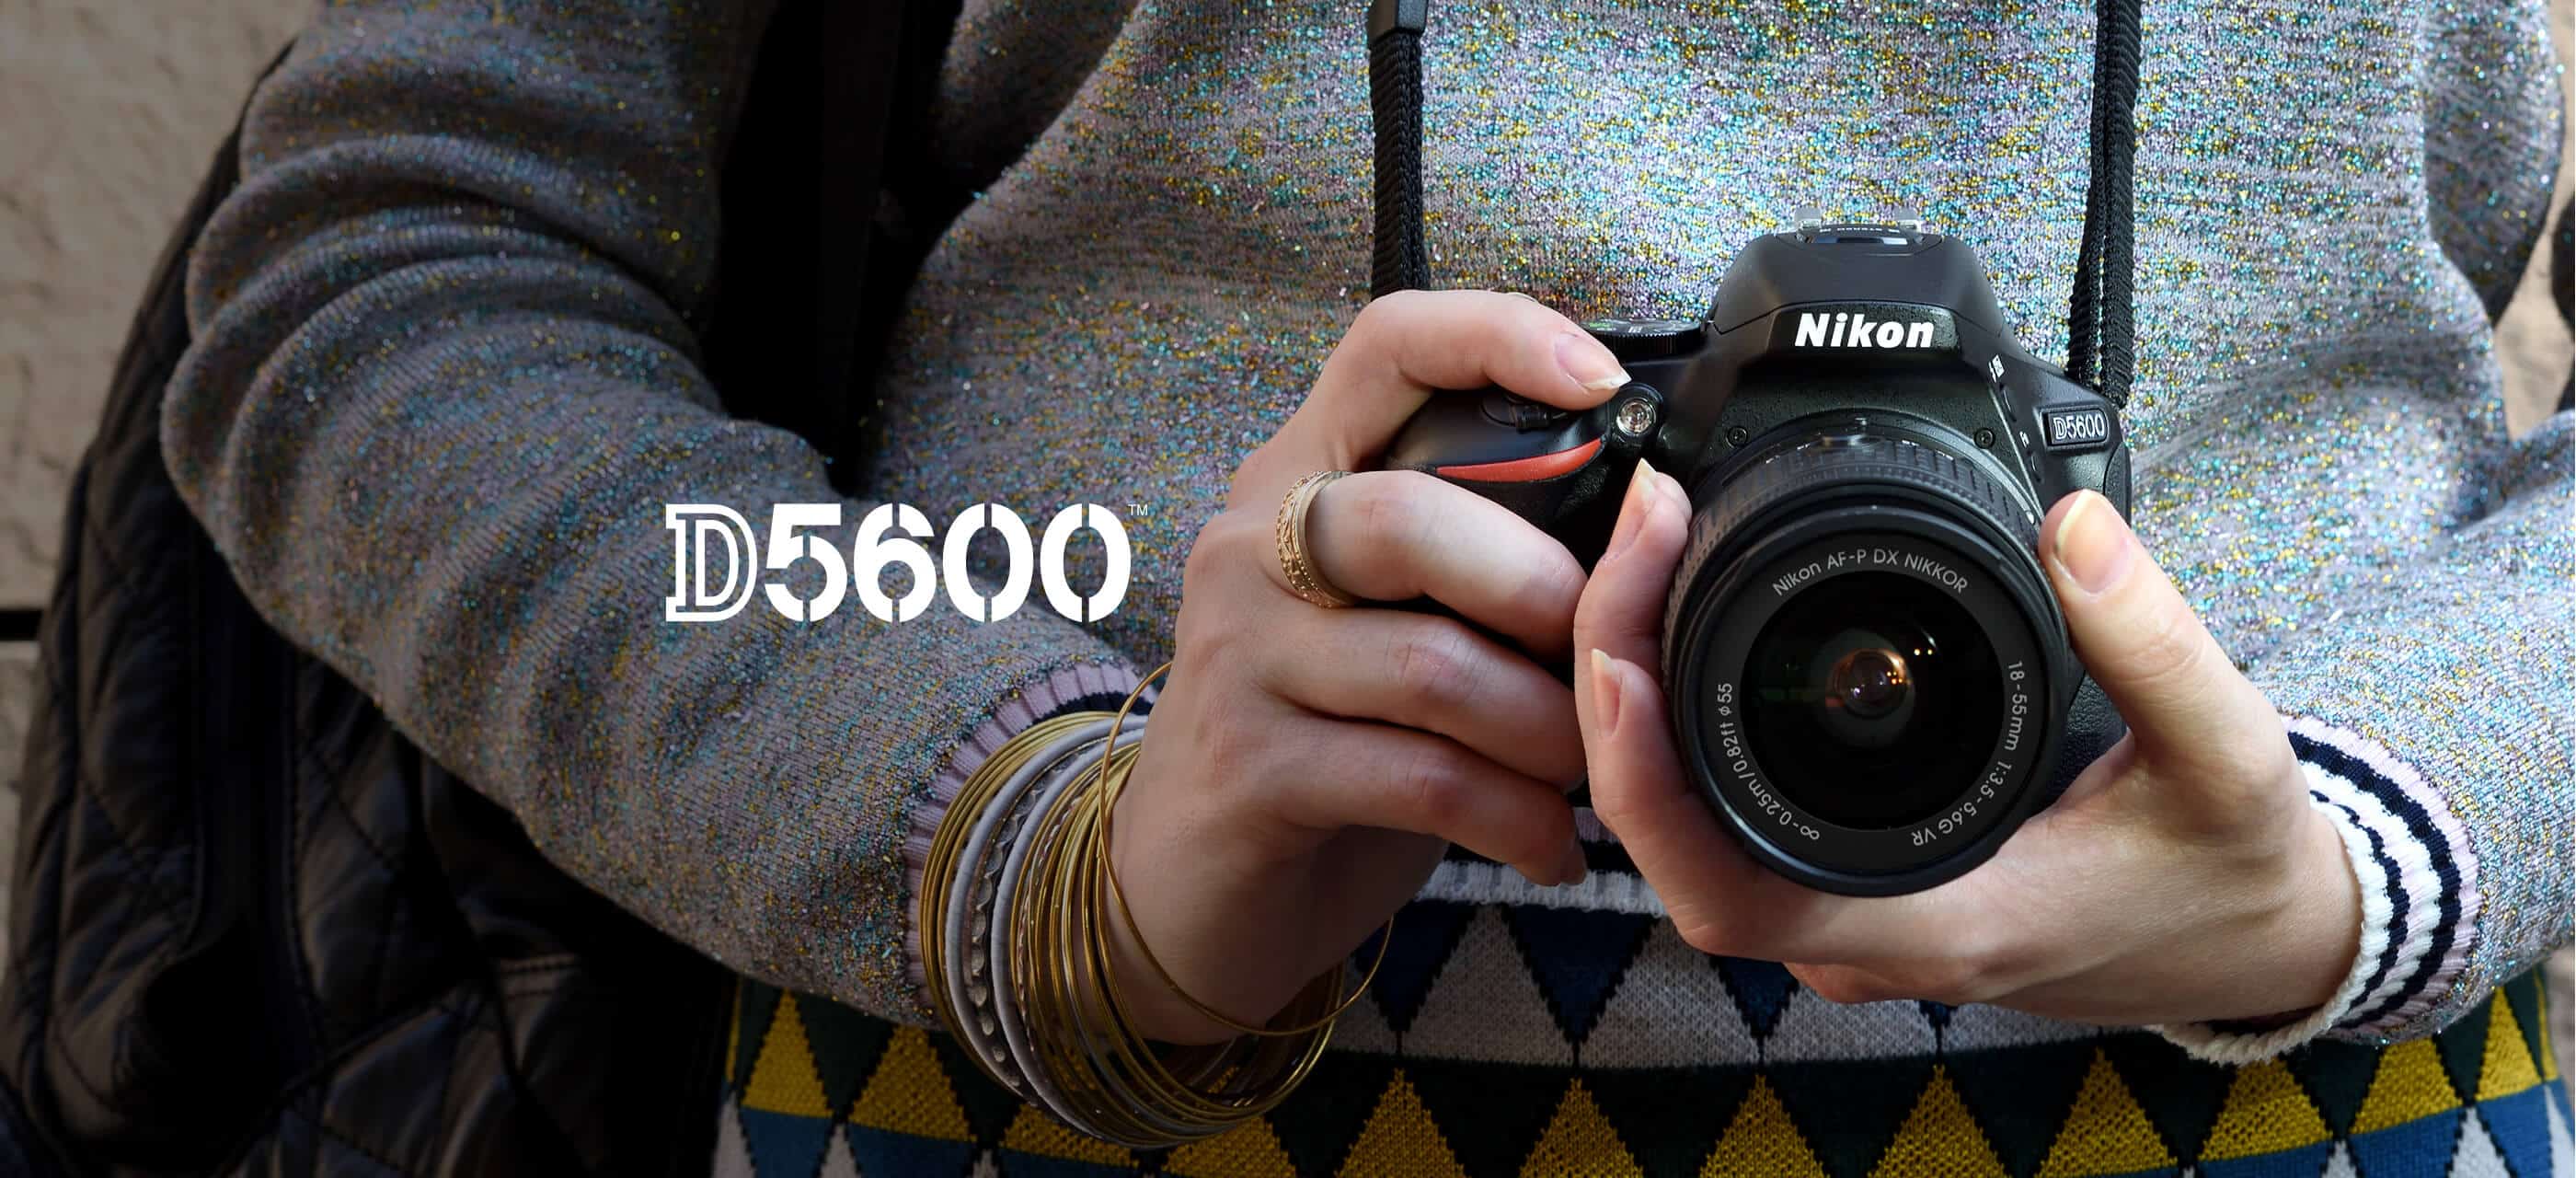 Woman holding Nikon D5600 black camera with 18-55mm zoom lens